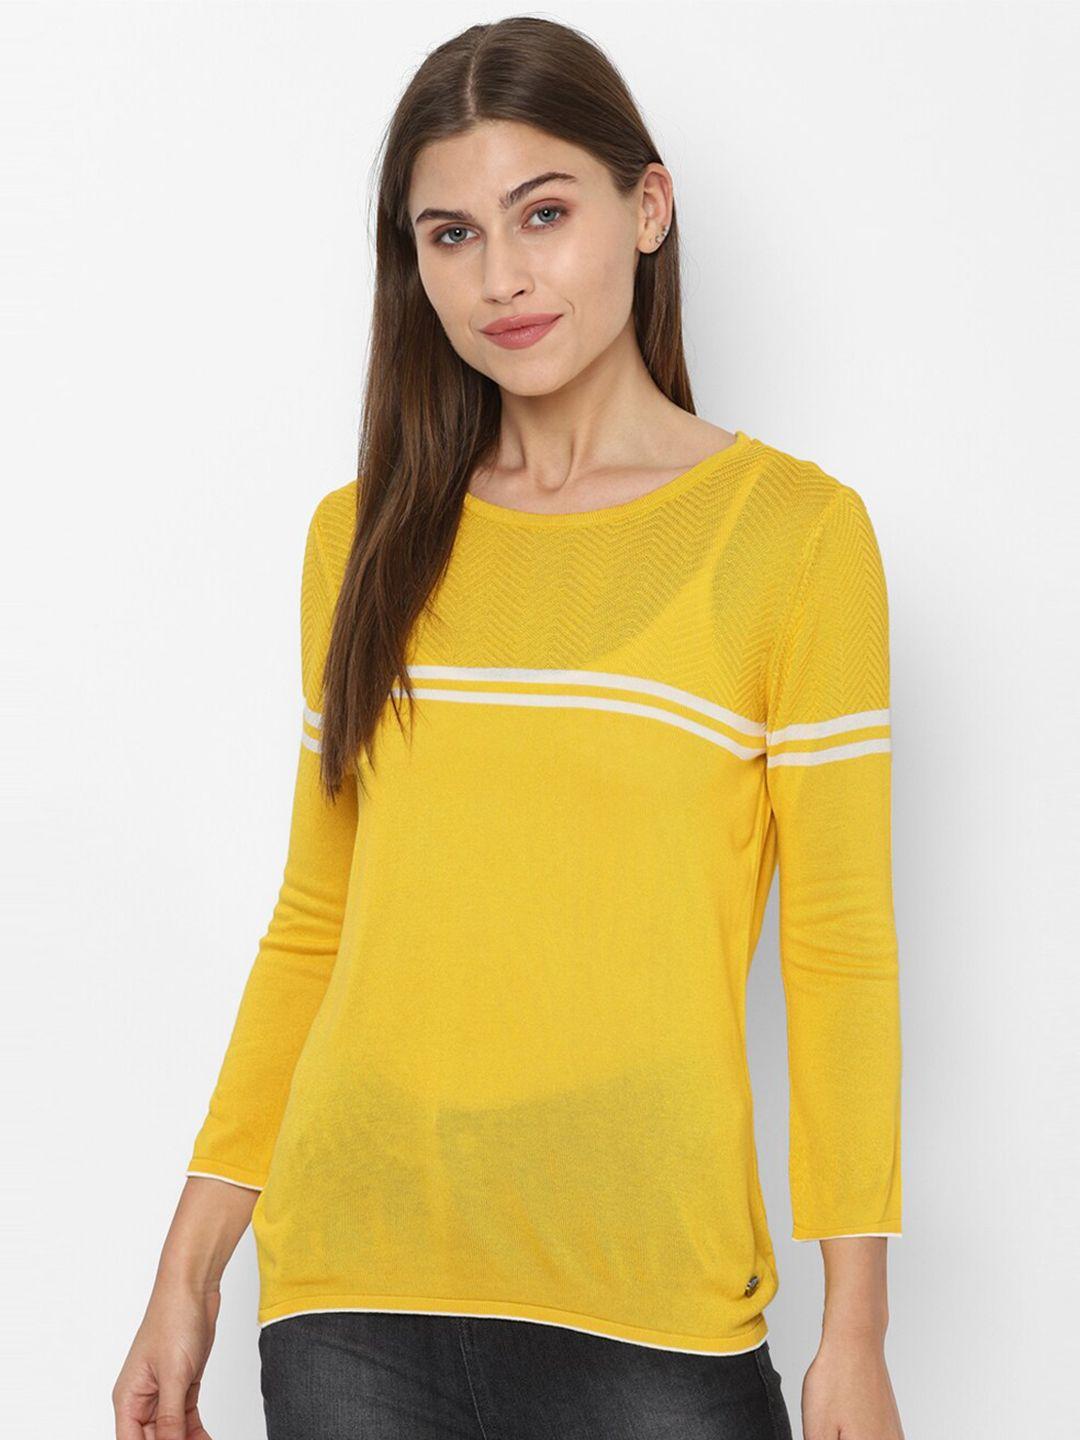 allen solly woman yellow striped top